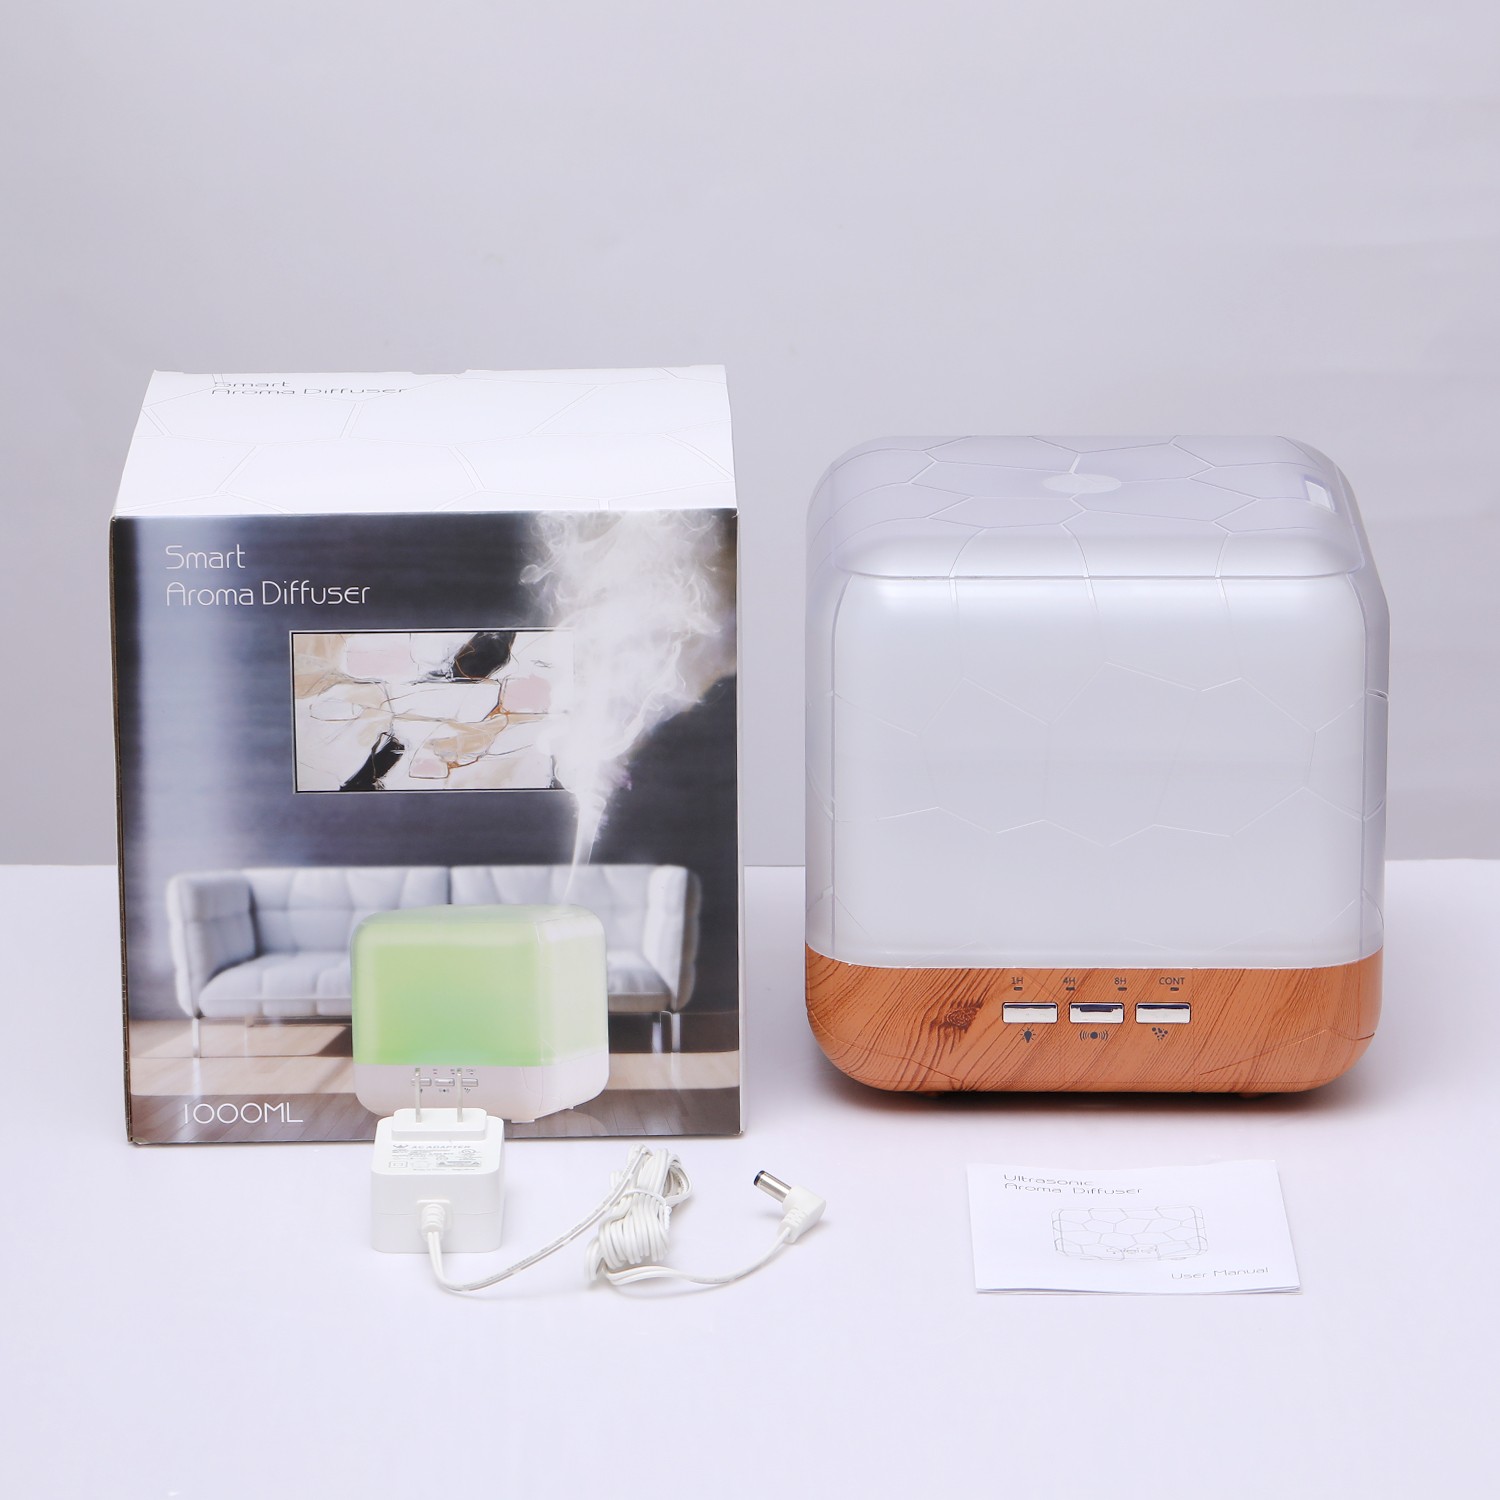 Pengwing-Aromatherapy Air Humidifier Aroma Essential Oil Pp Plastic Colorful New-10